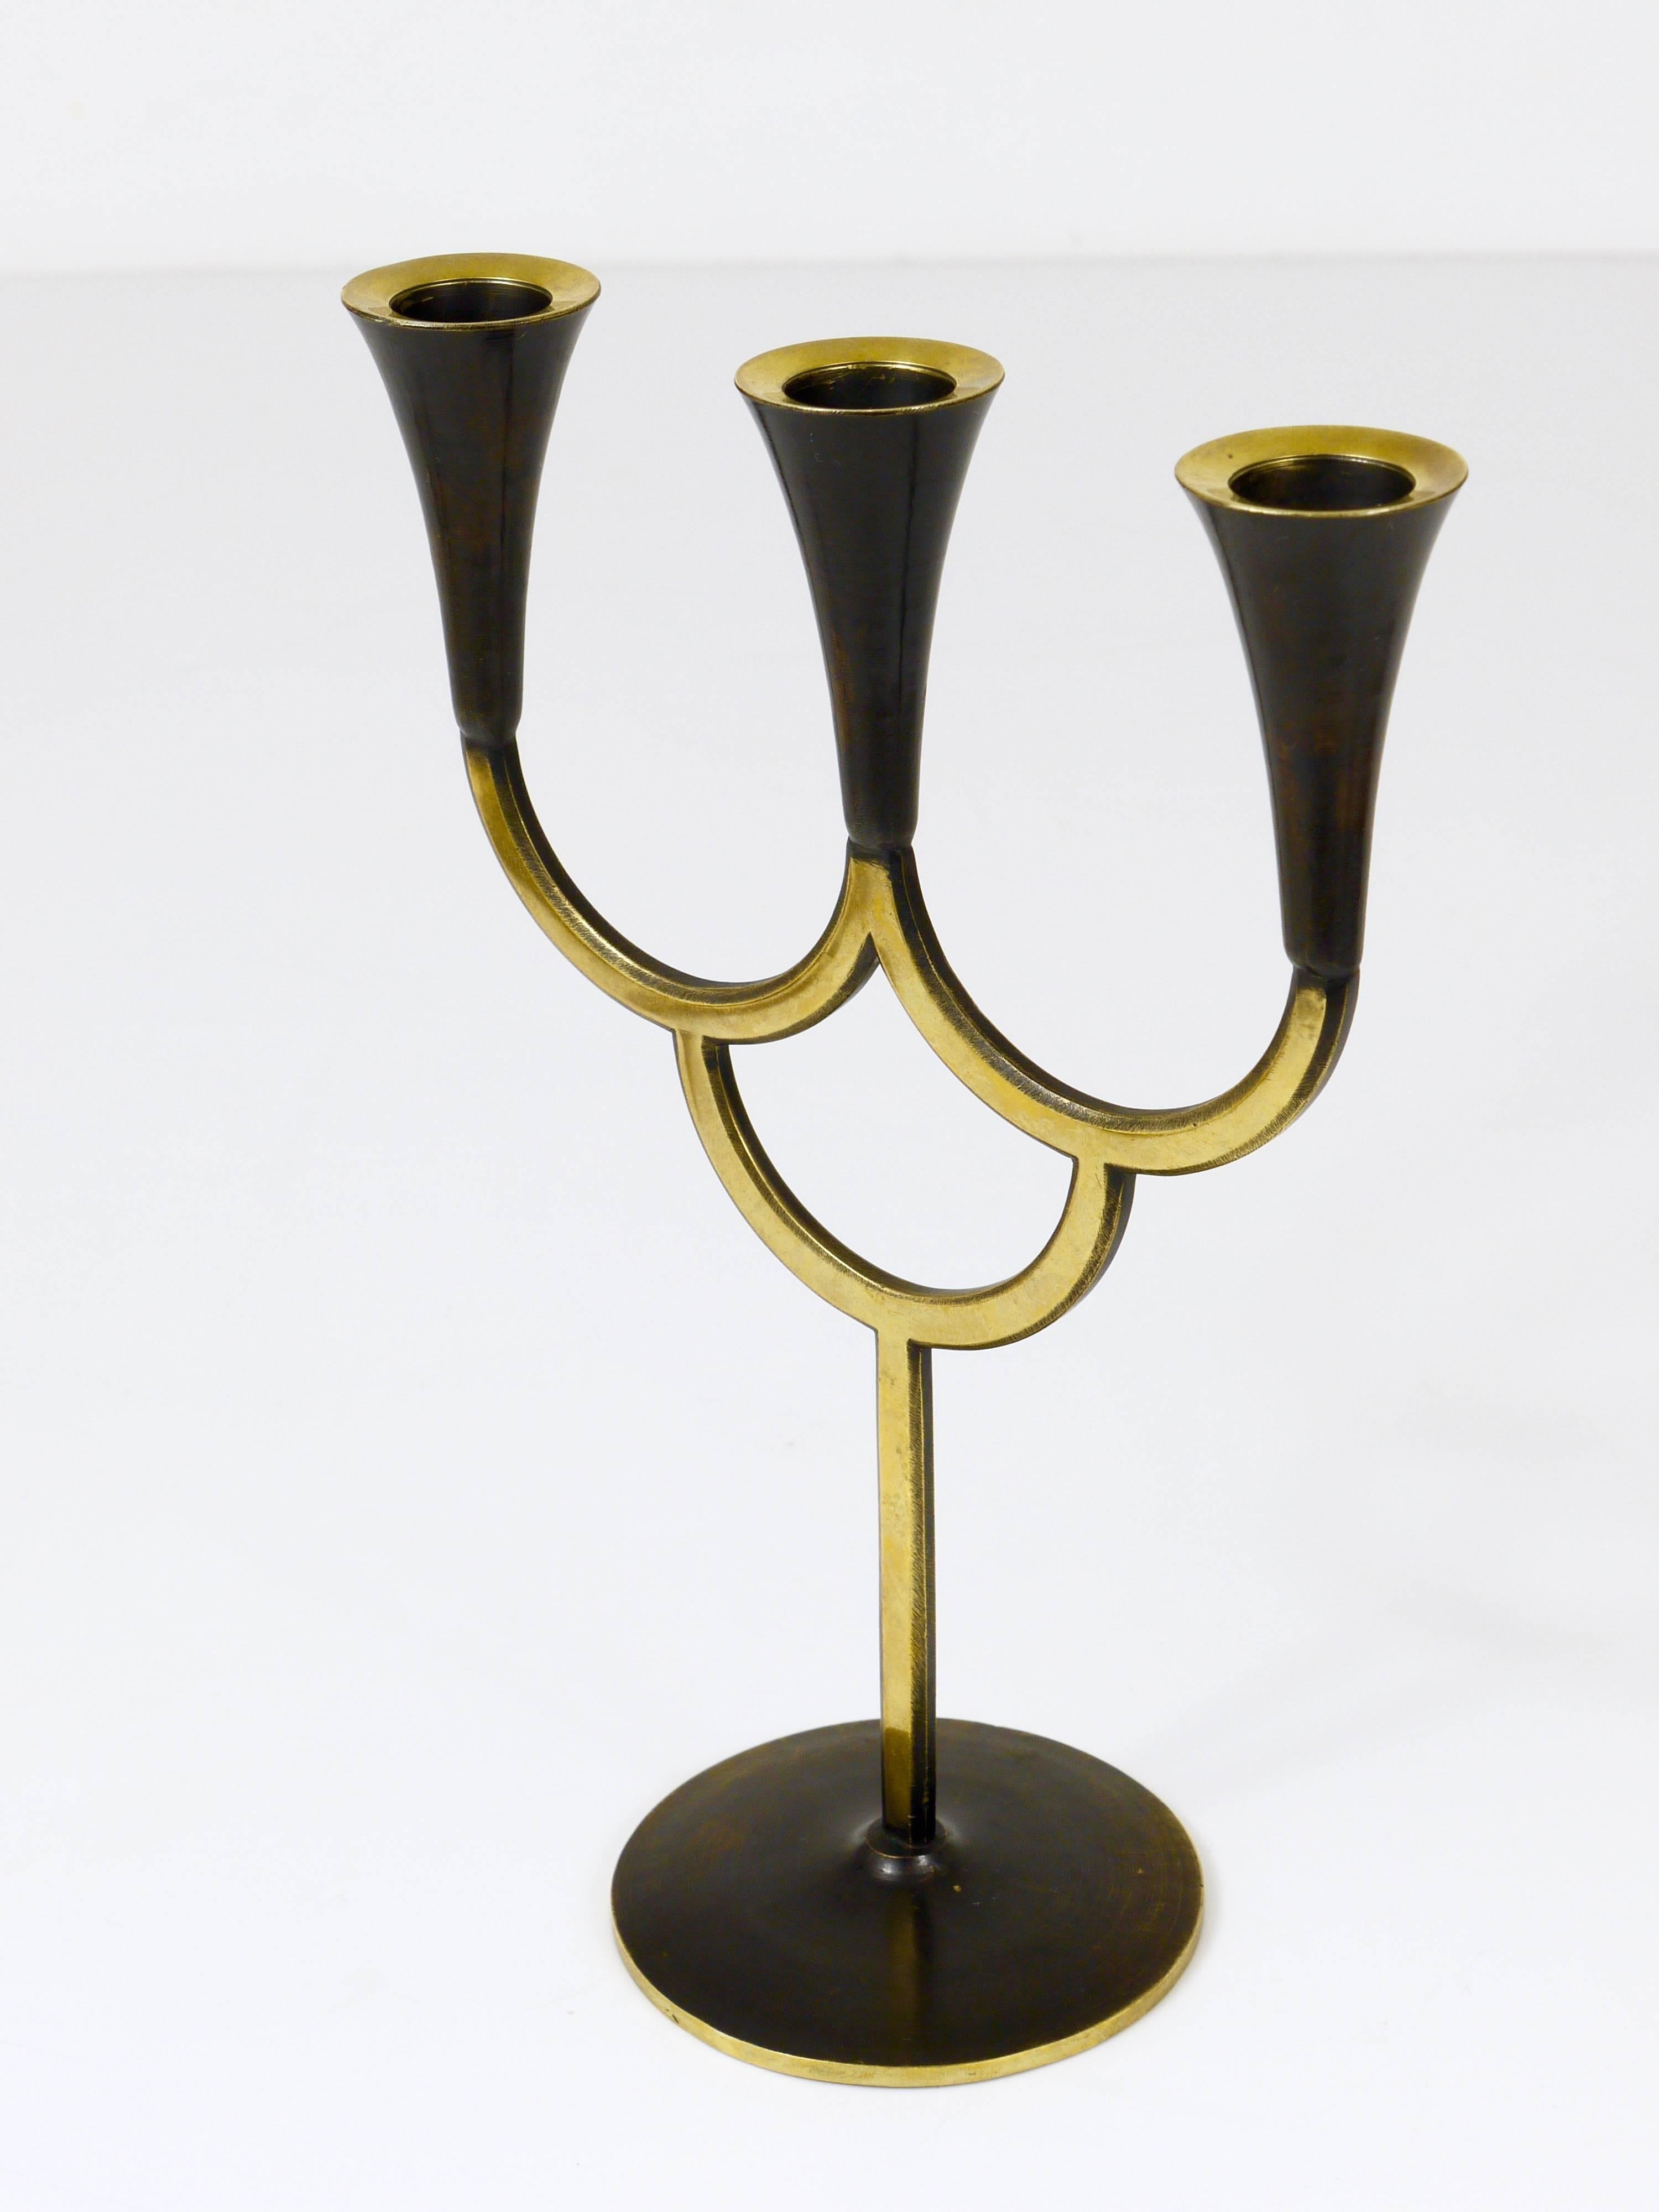 A beautiful Austrian modernist three-arm candelabra  candleholder / candlestick, made of brass, partly black-finished. Designed by Richard Rohac, manufactured by Atelier Rohac in the 1950s, Vienna, Austria. Marked on its bottom, excellent condition.